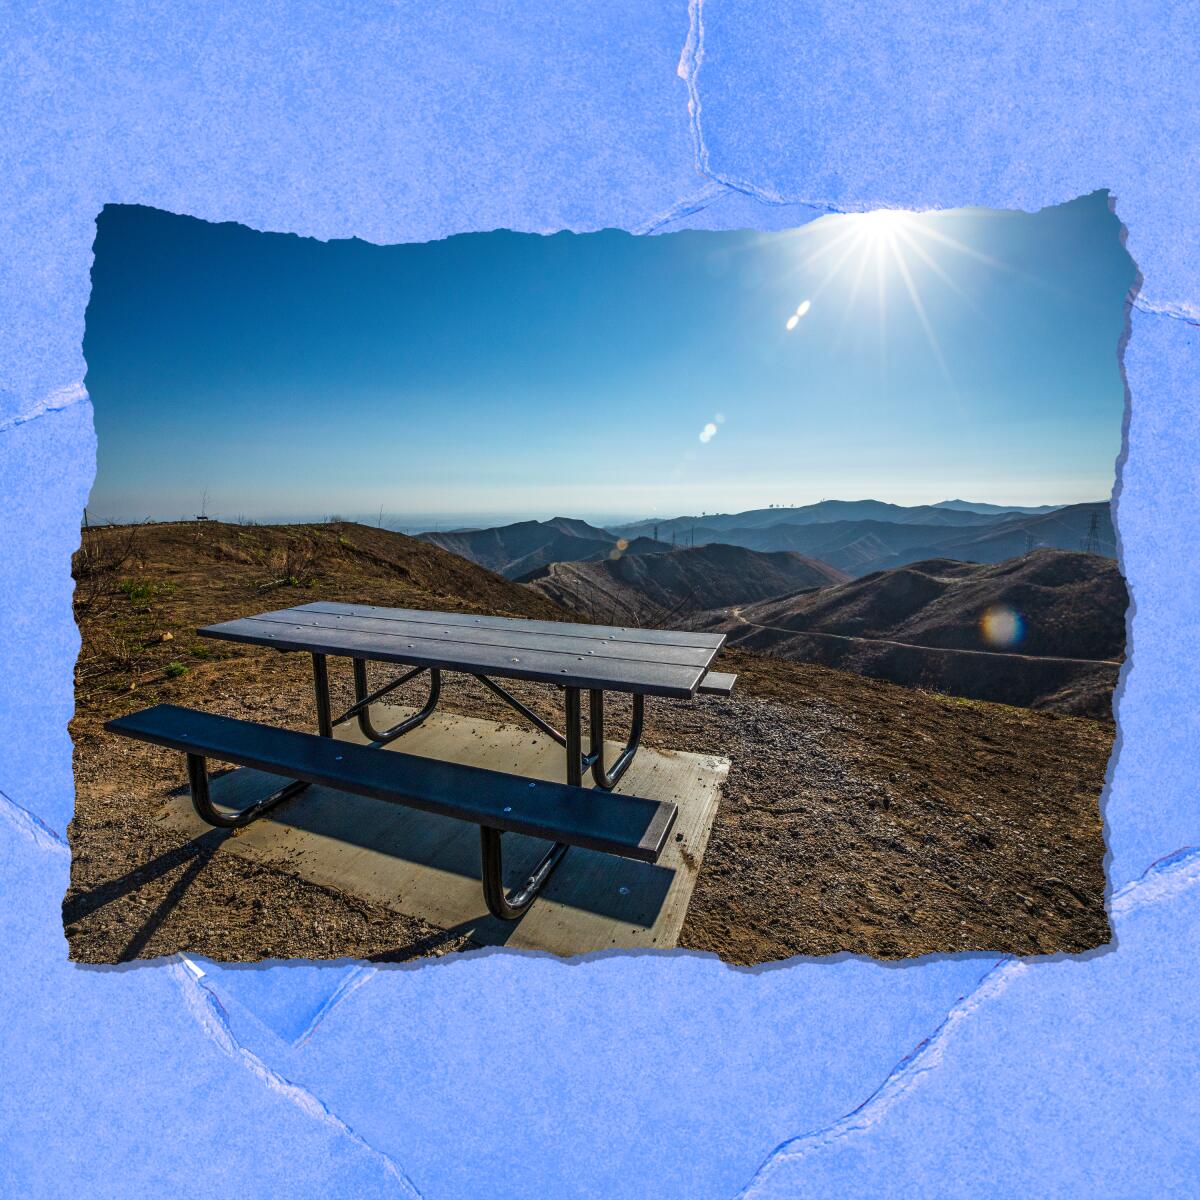 The sun shines on an empty picnic table that overlooks barren hills.